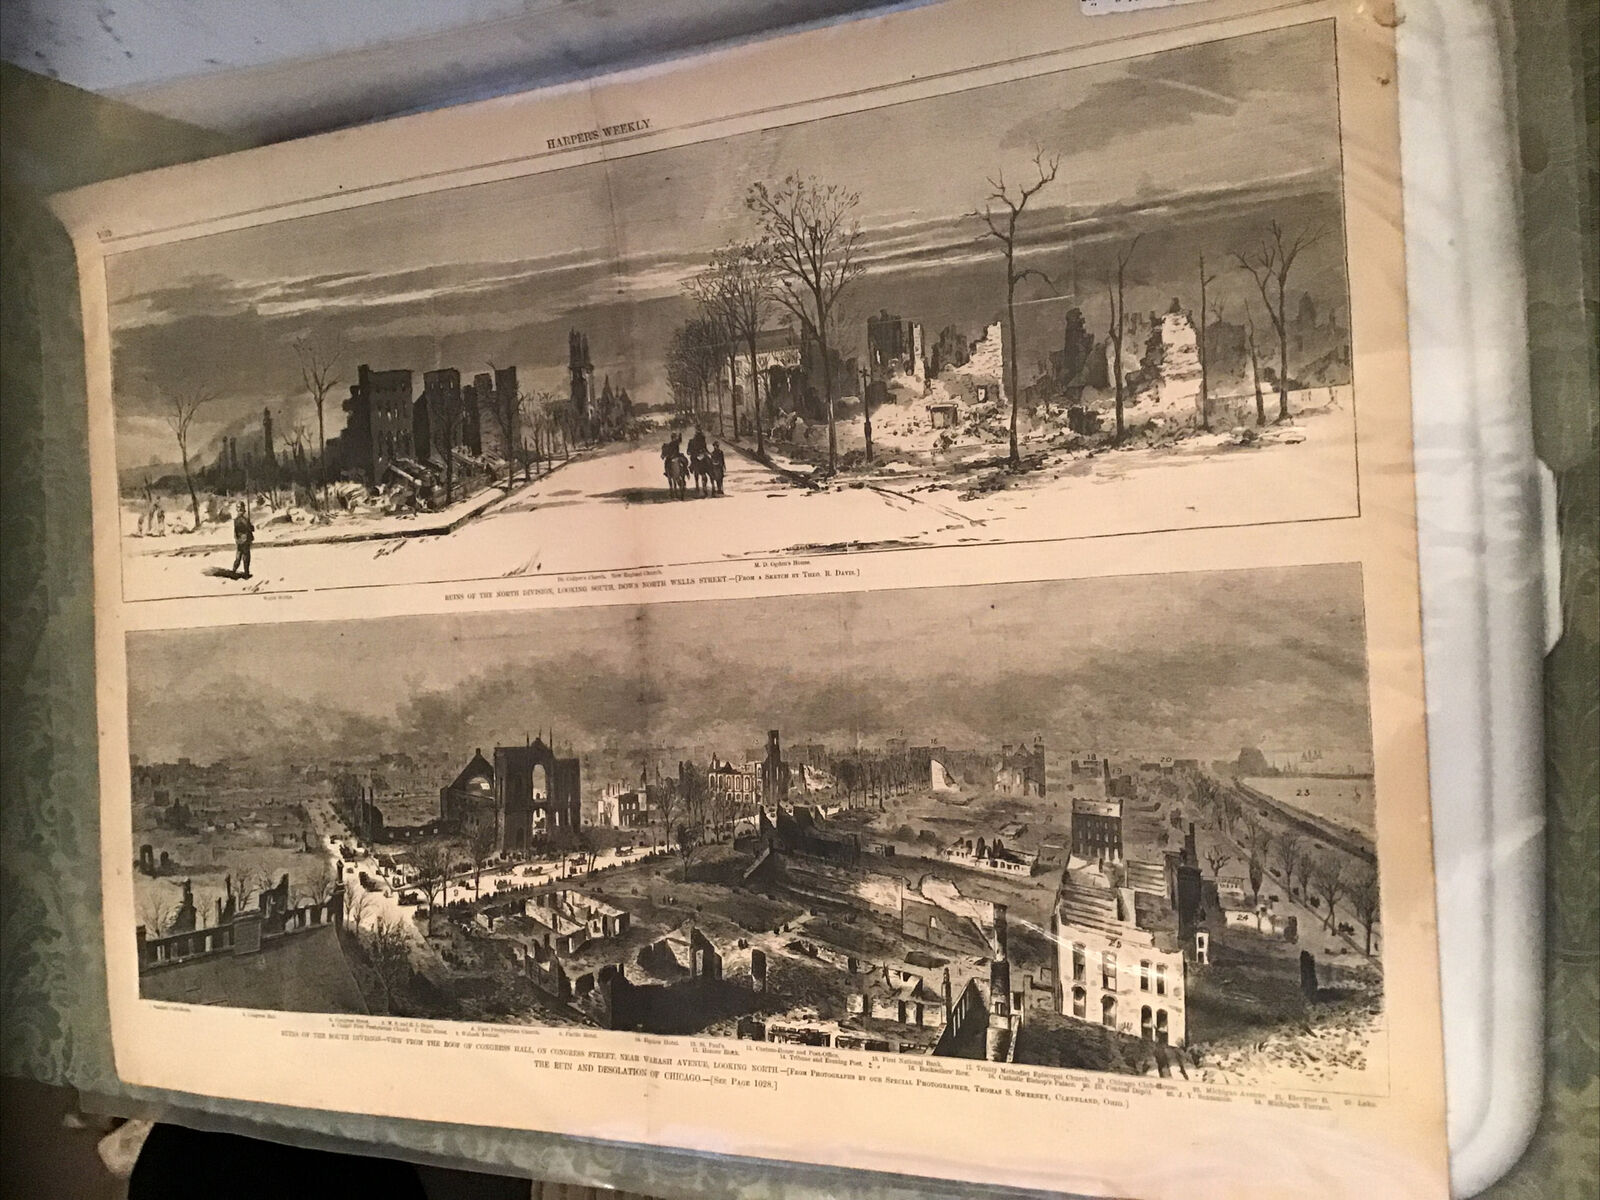 Pictorial Ruins and Desolation of Chicago Fire Harper Weekly November 4, 1871